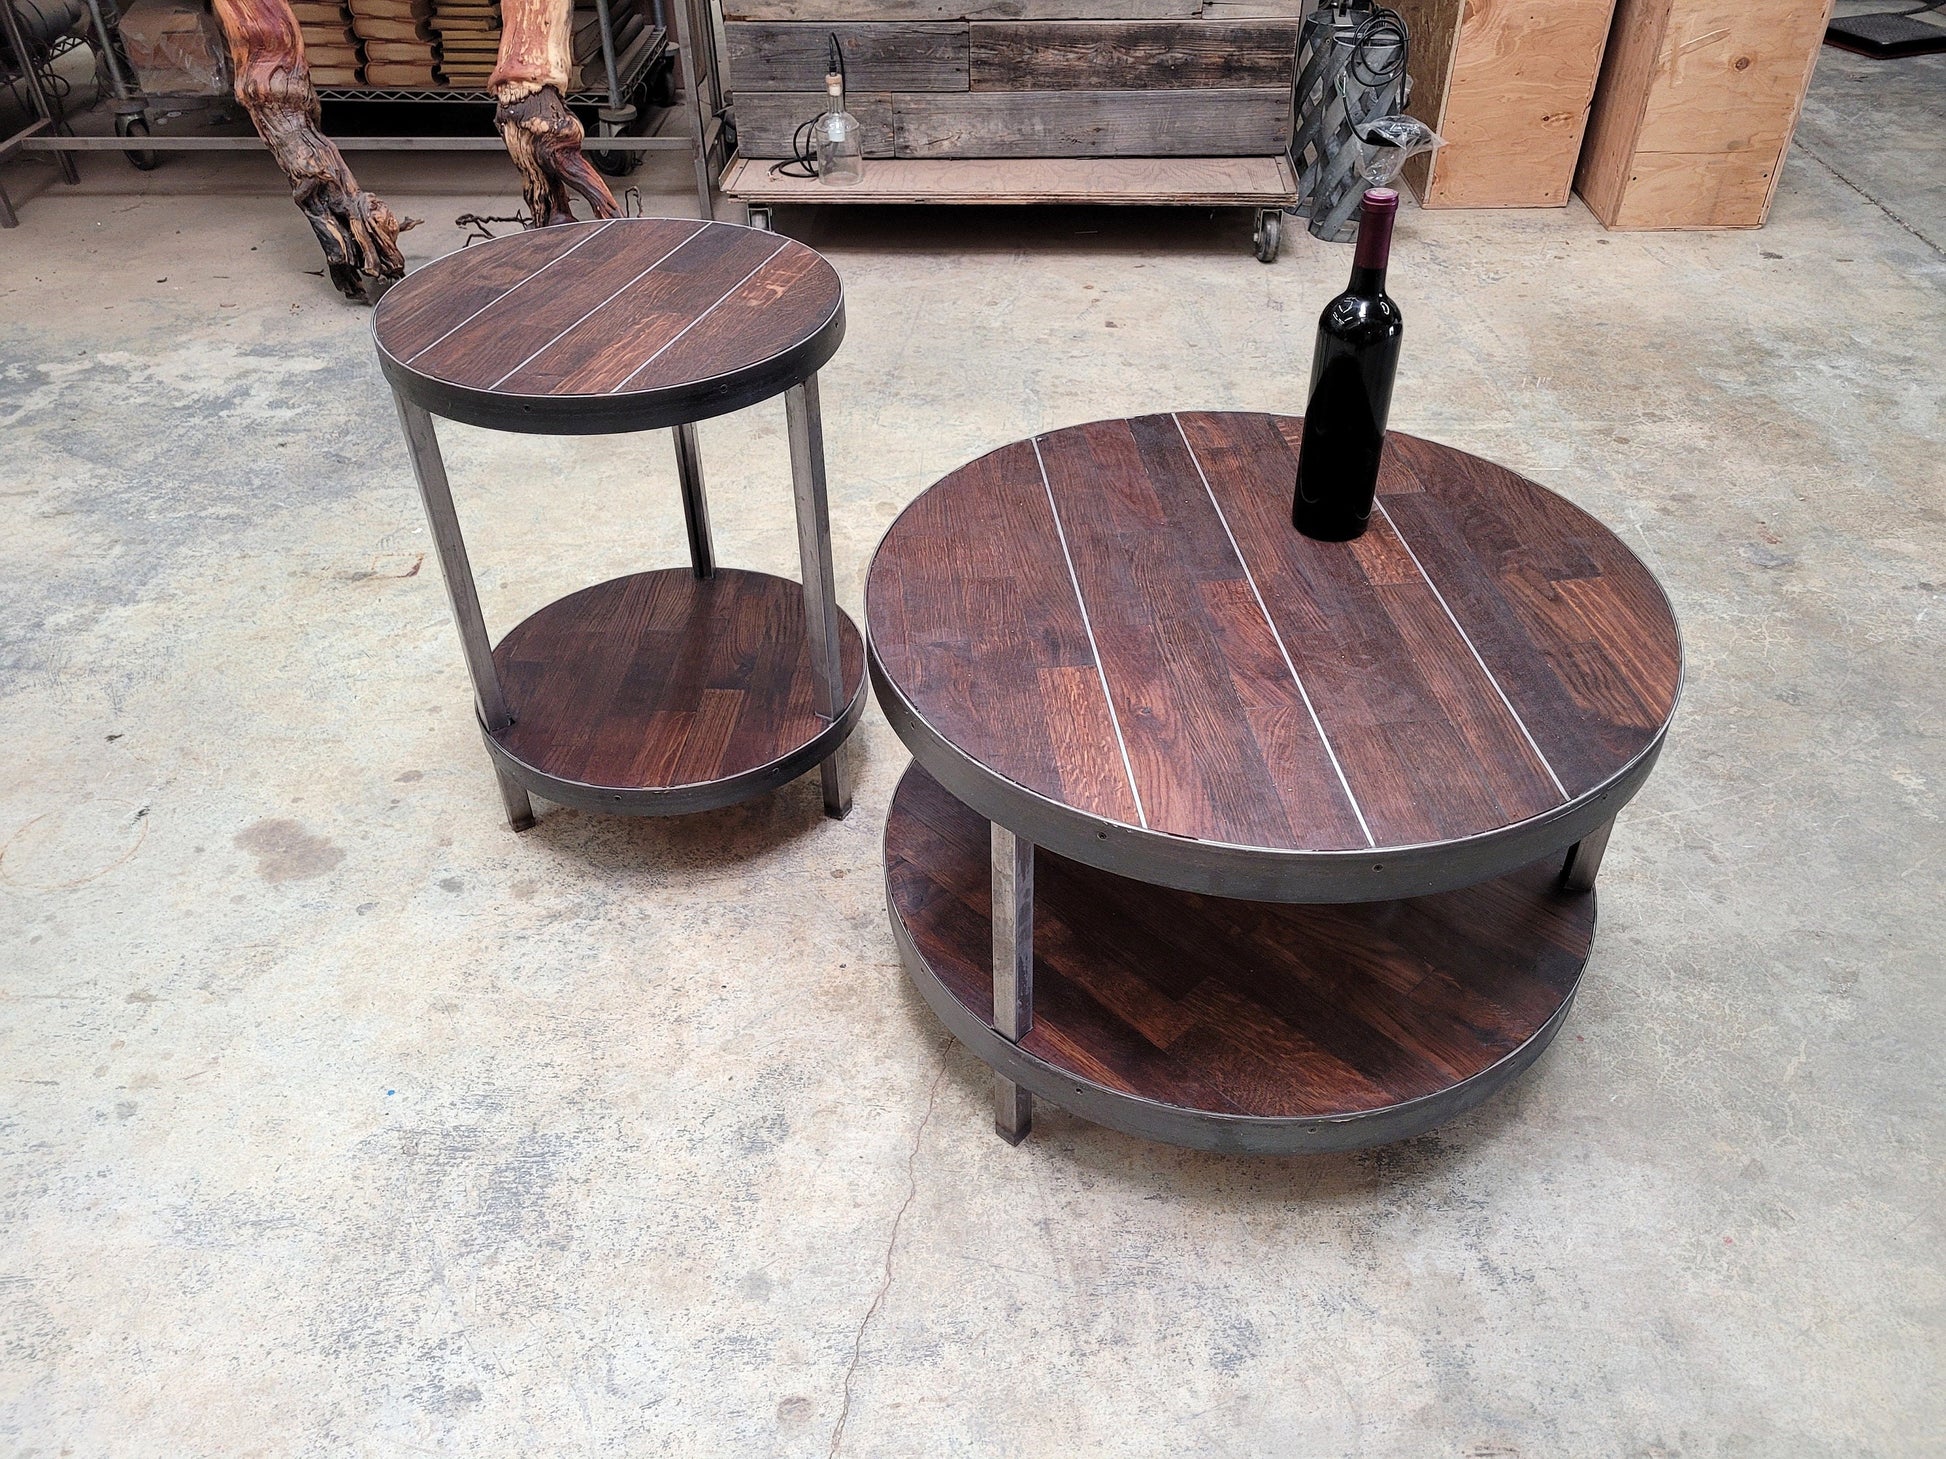 Wine Barrel Coffee Table - Kolo - Made from large reclaimed California oak wine tanks 100% Recycled!